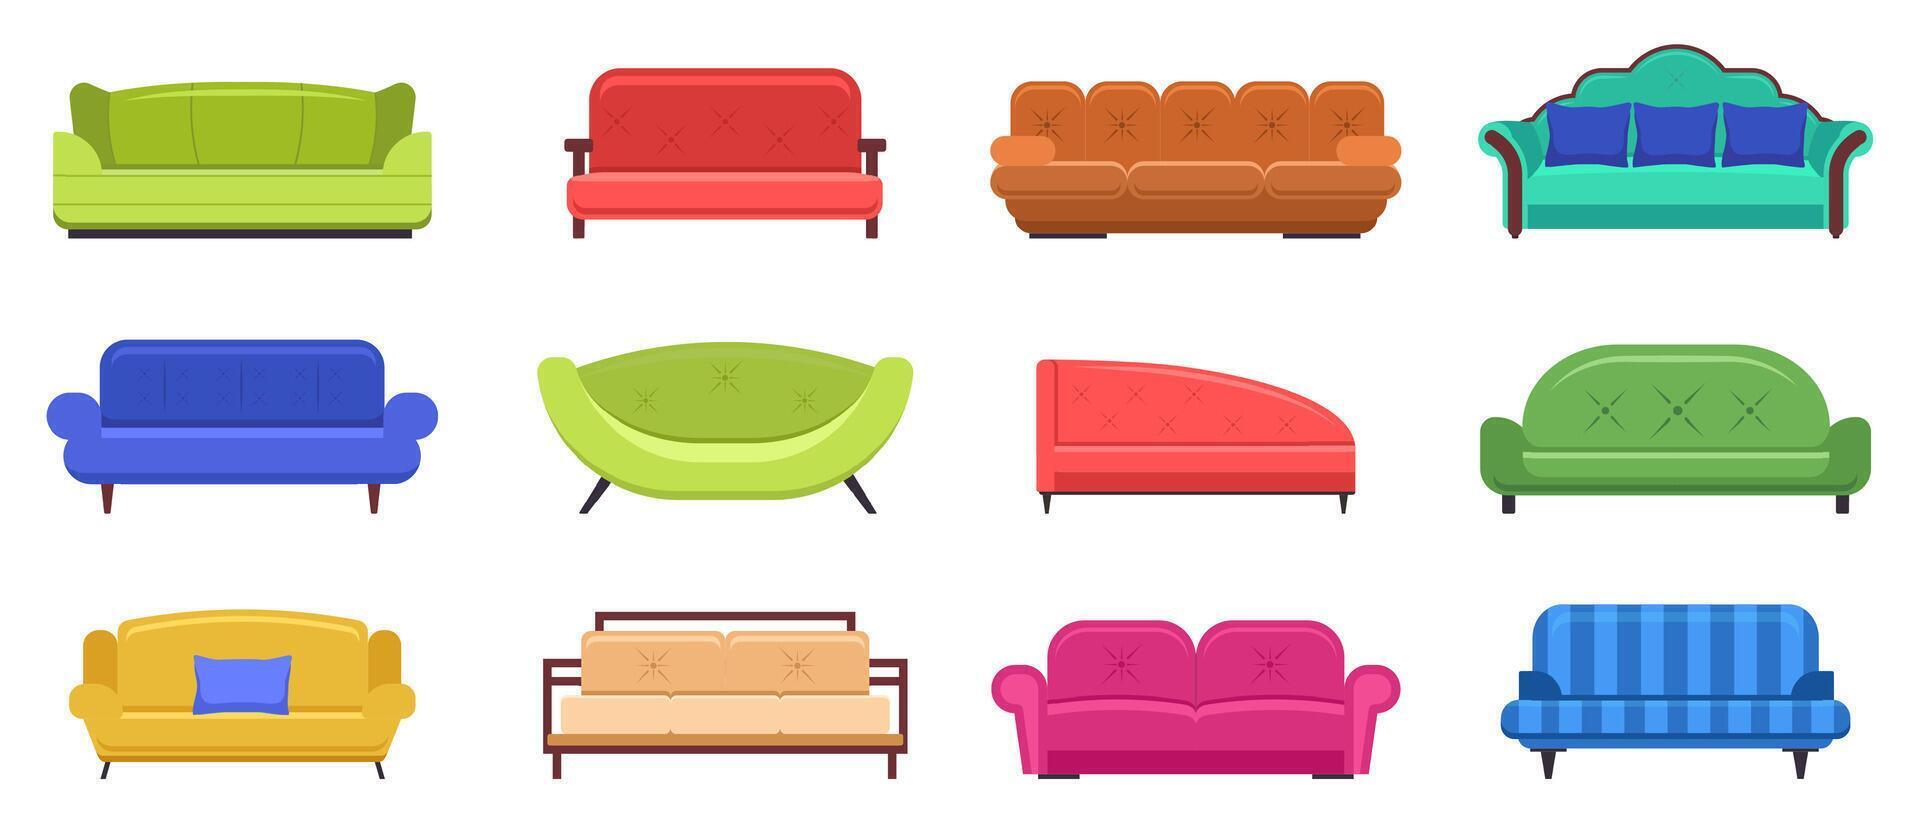 Couch furniture. Comfortable sofas, apartment interior couch furniture, modern domestic couch vector isolated illustration icons set